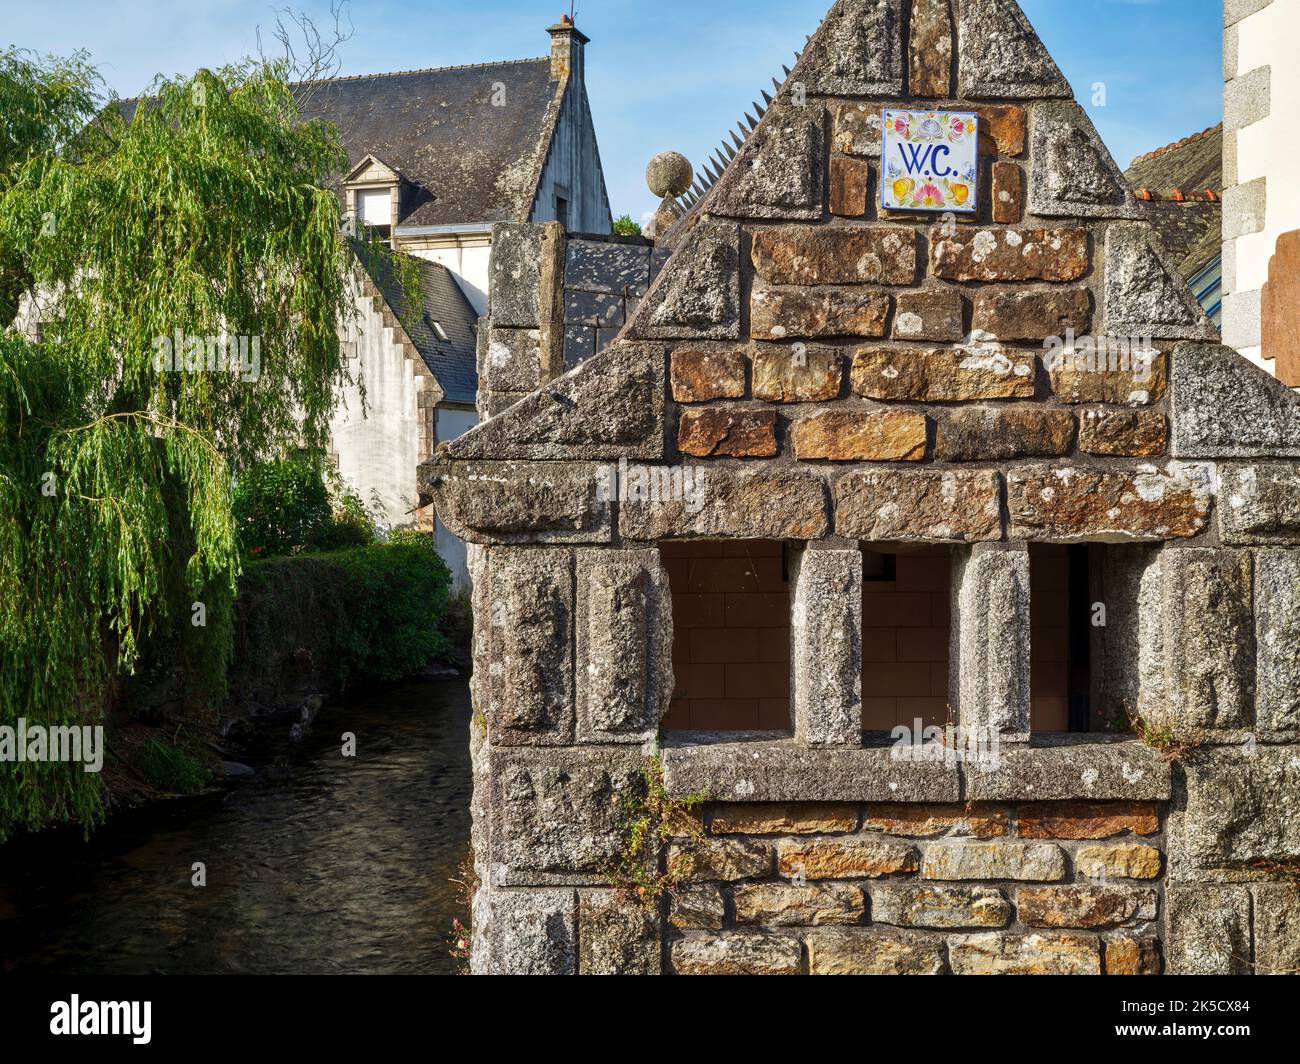 Artist colony Pont-Aven, cradle of impressionism, Brittany, France Stock Photo